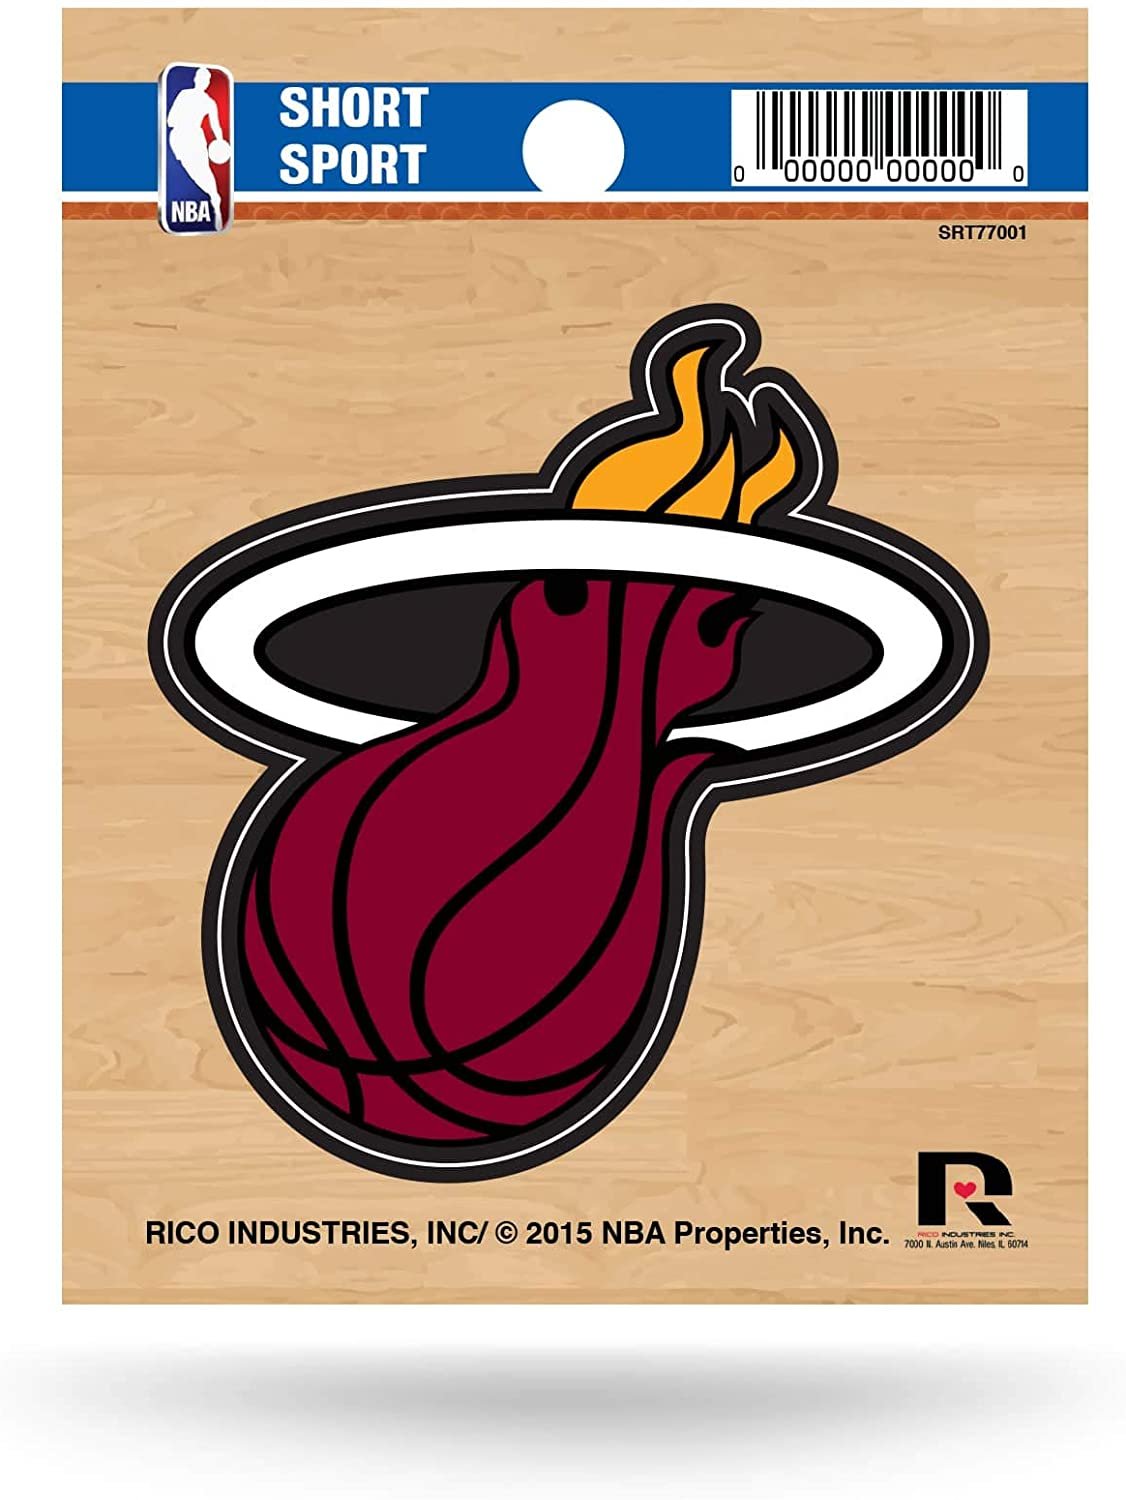 Miami Heat 3 Inch Sticker Decal, Full Adhesive Backing, Easy Peel and Stick Application